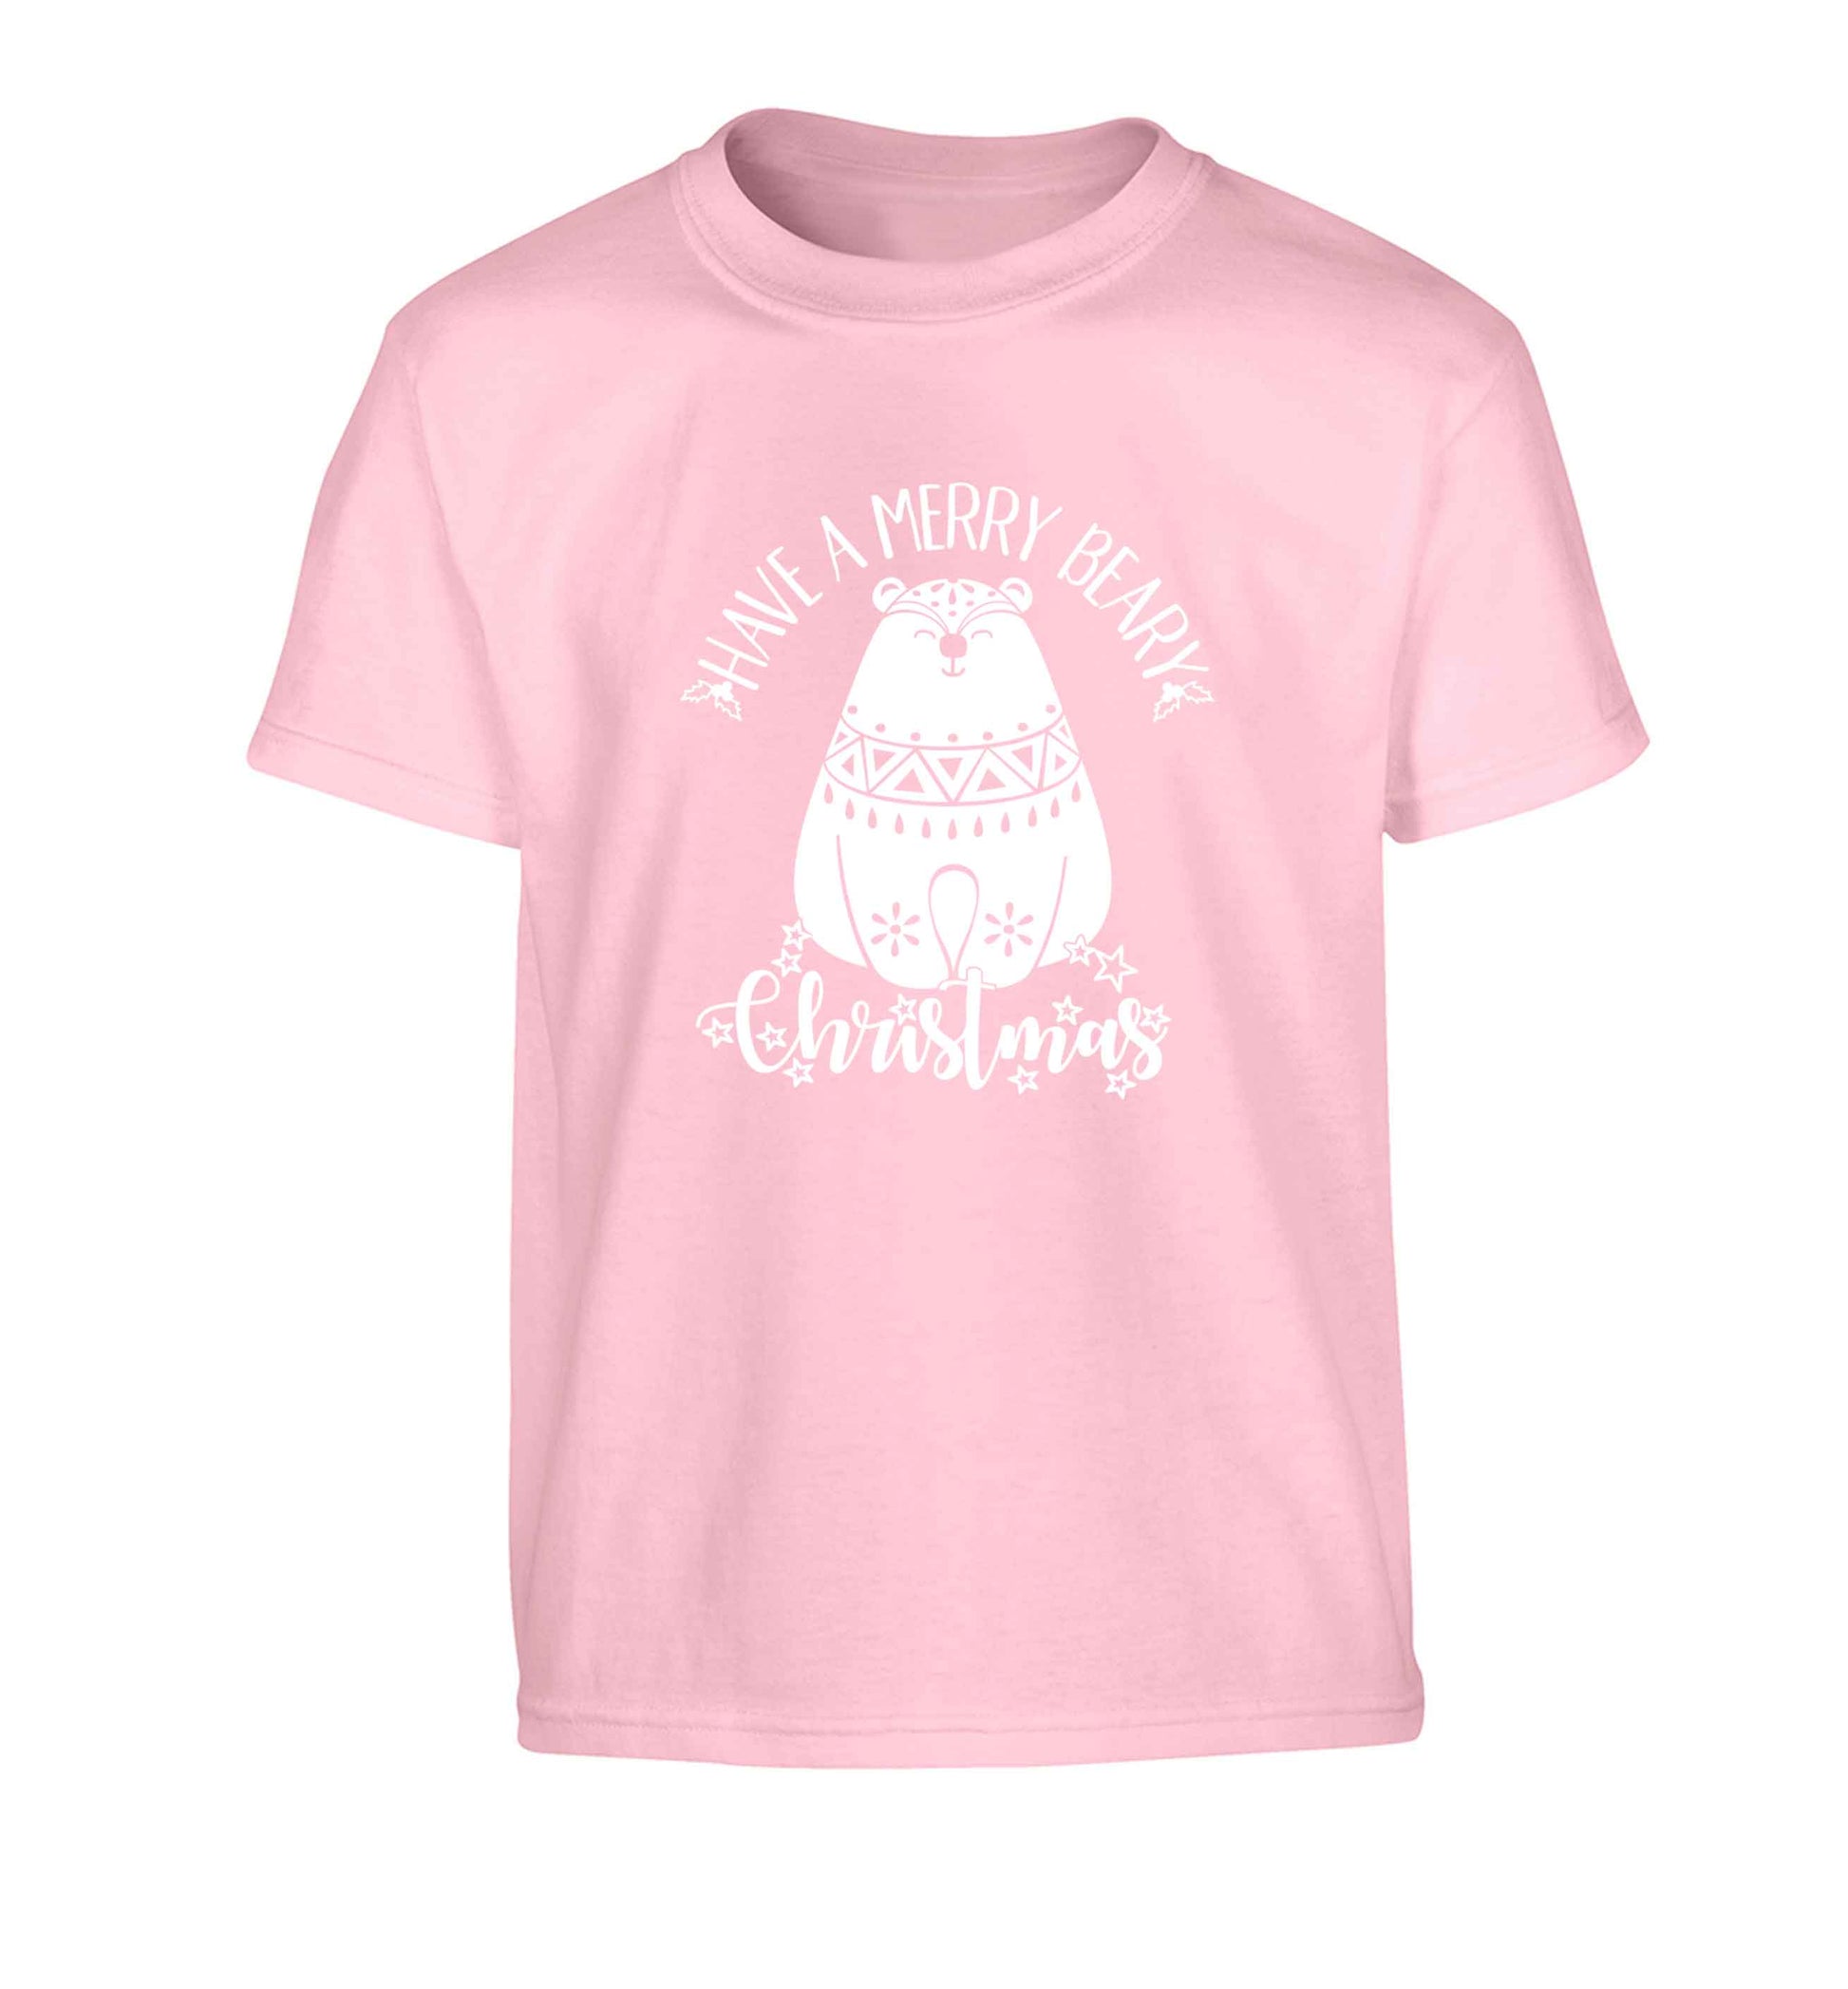 Have a merry beary Christmas Children's light pink Tshirt 12-13 Years